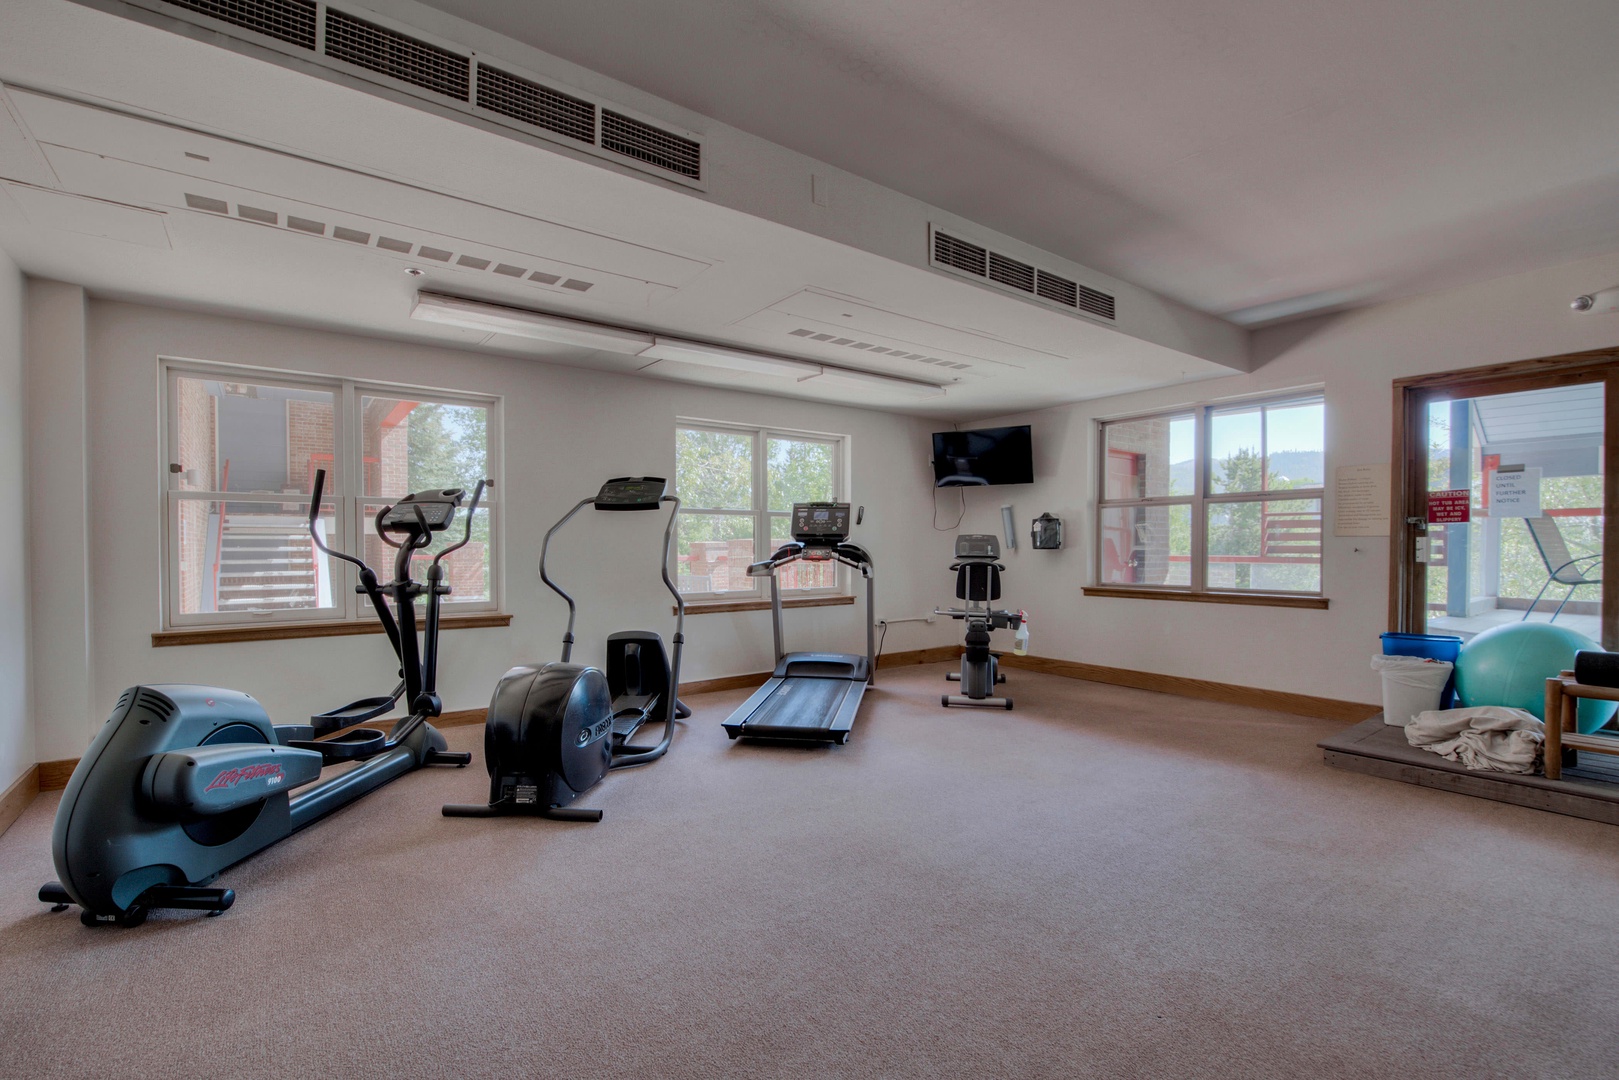 Fitness room in the complex